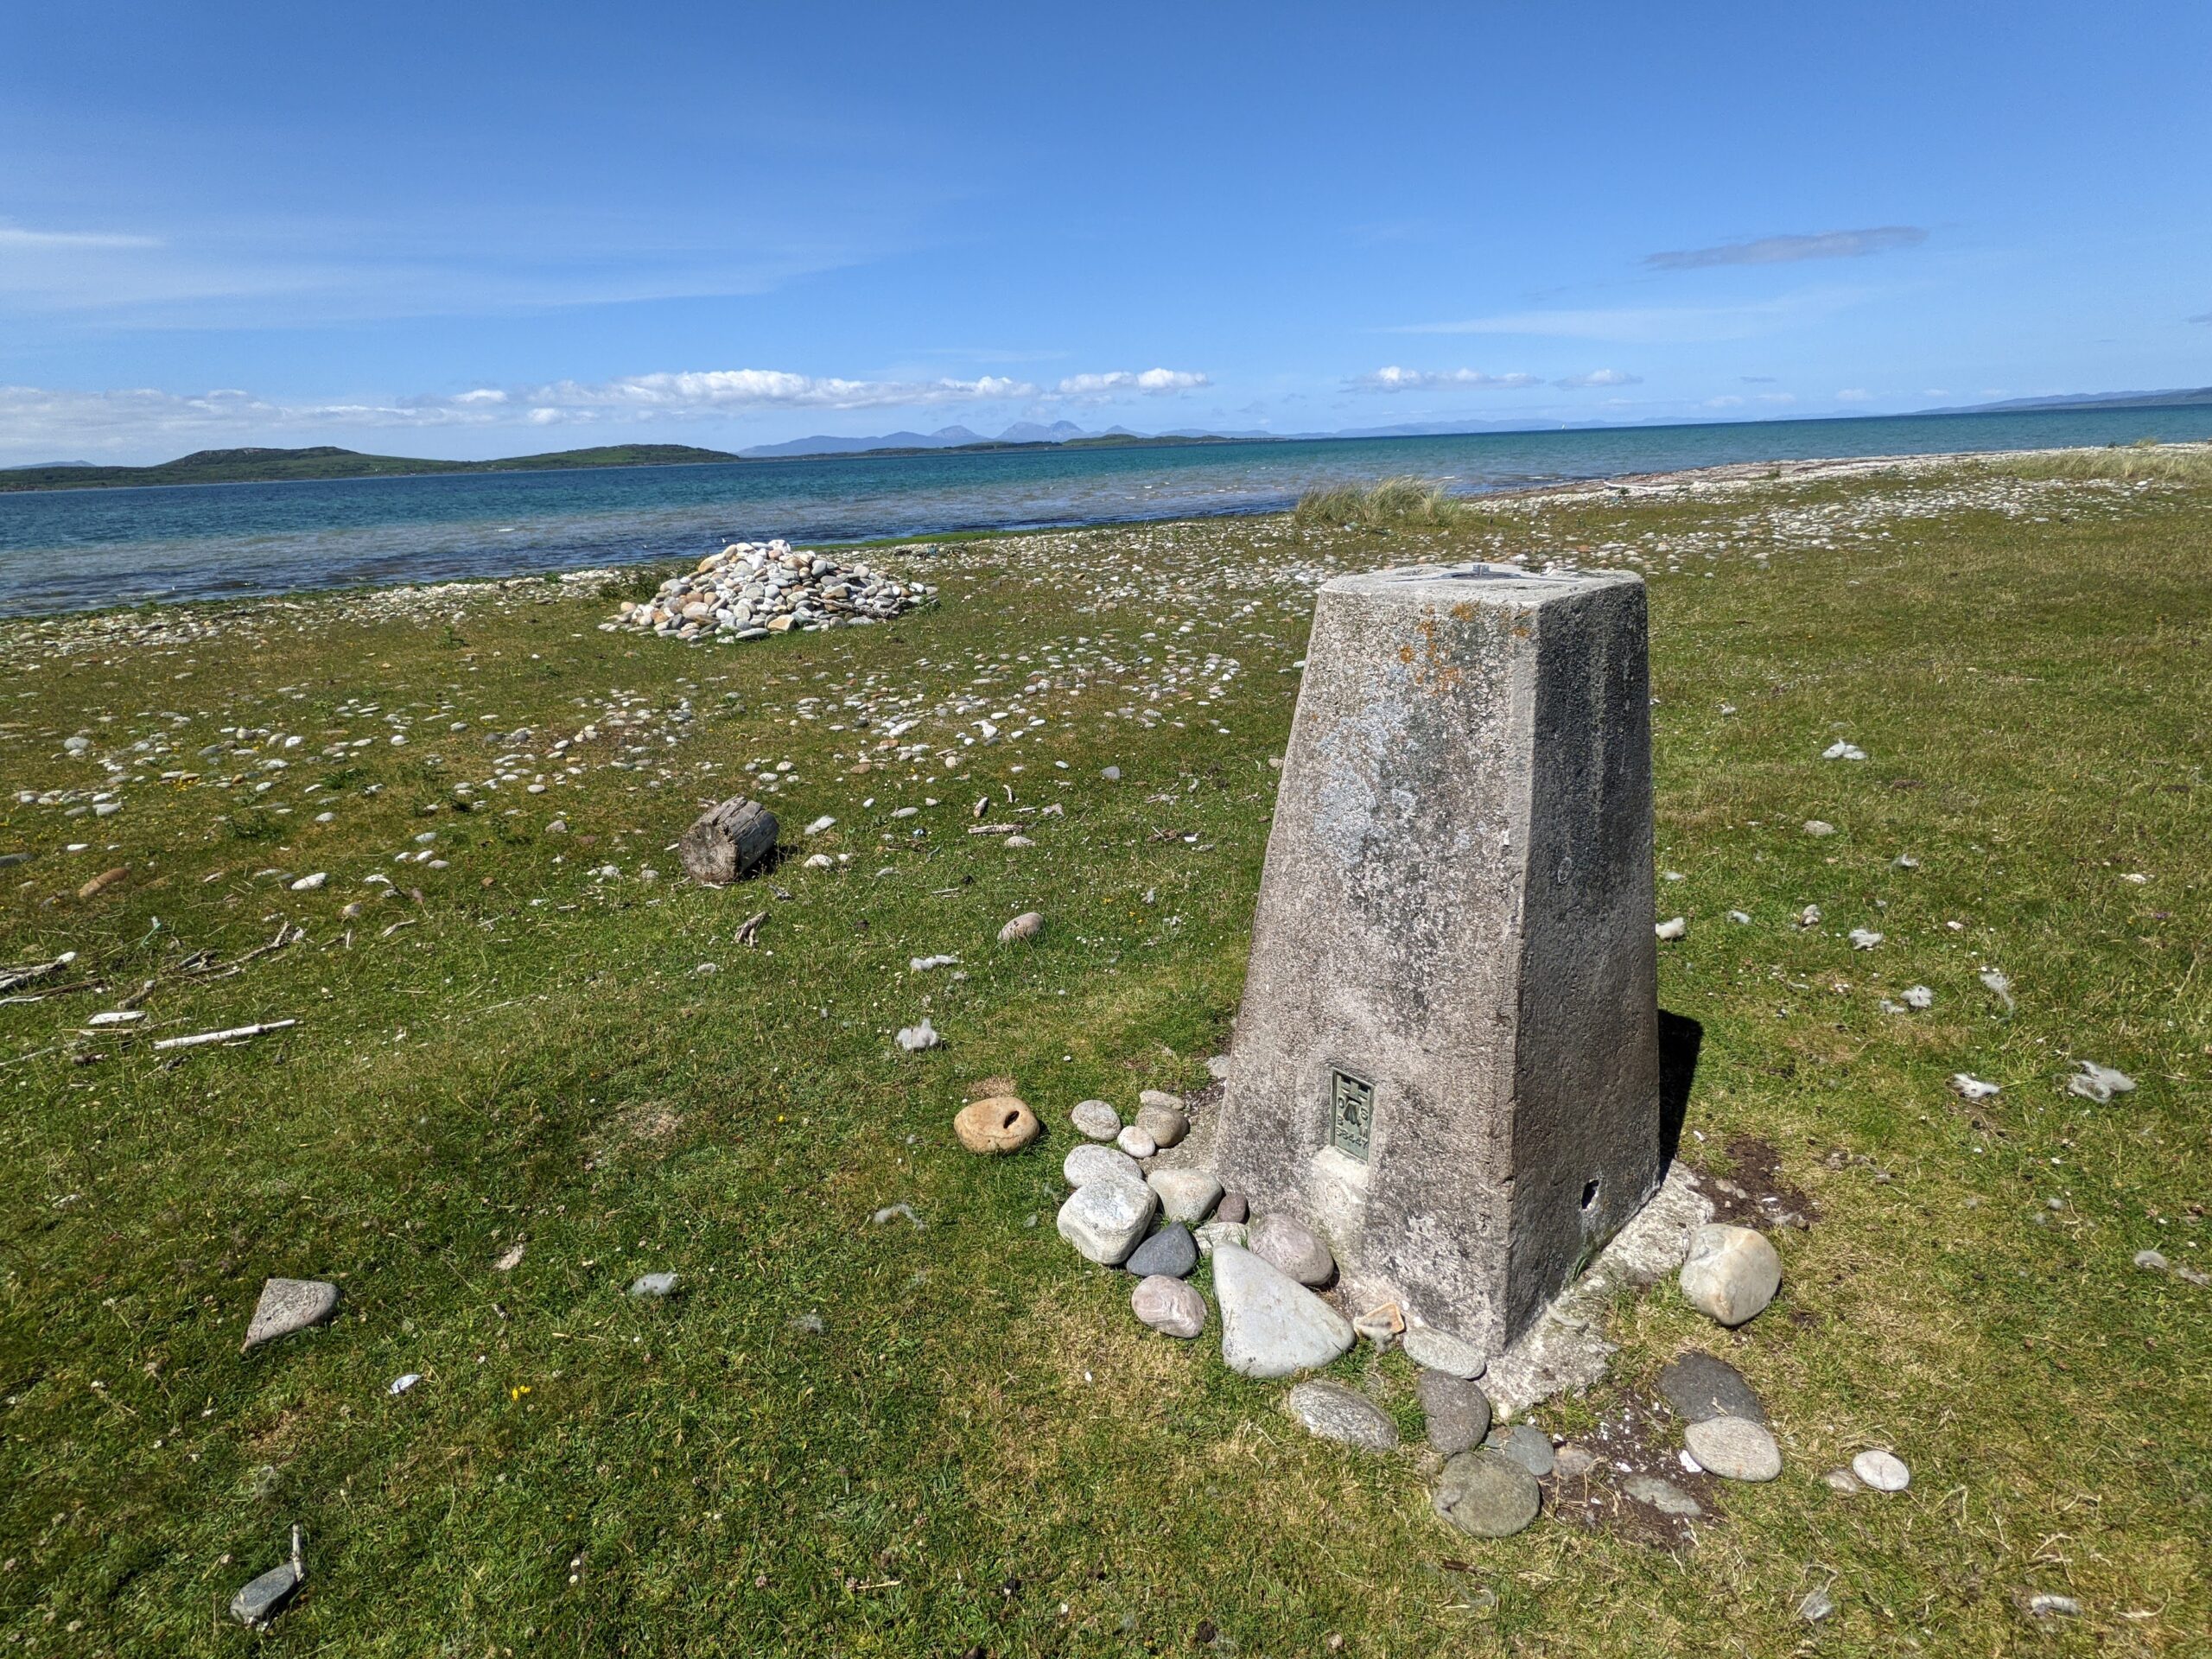 The lowest trig point in Scotland